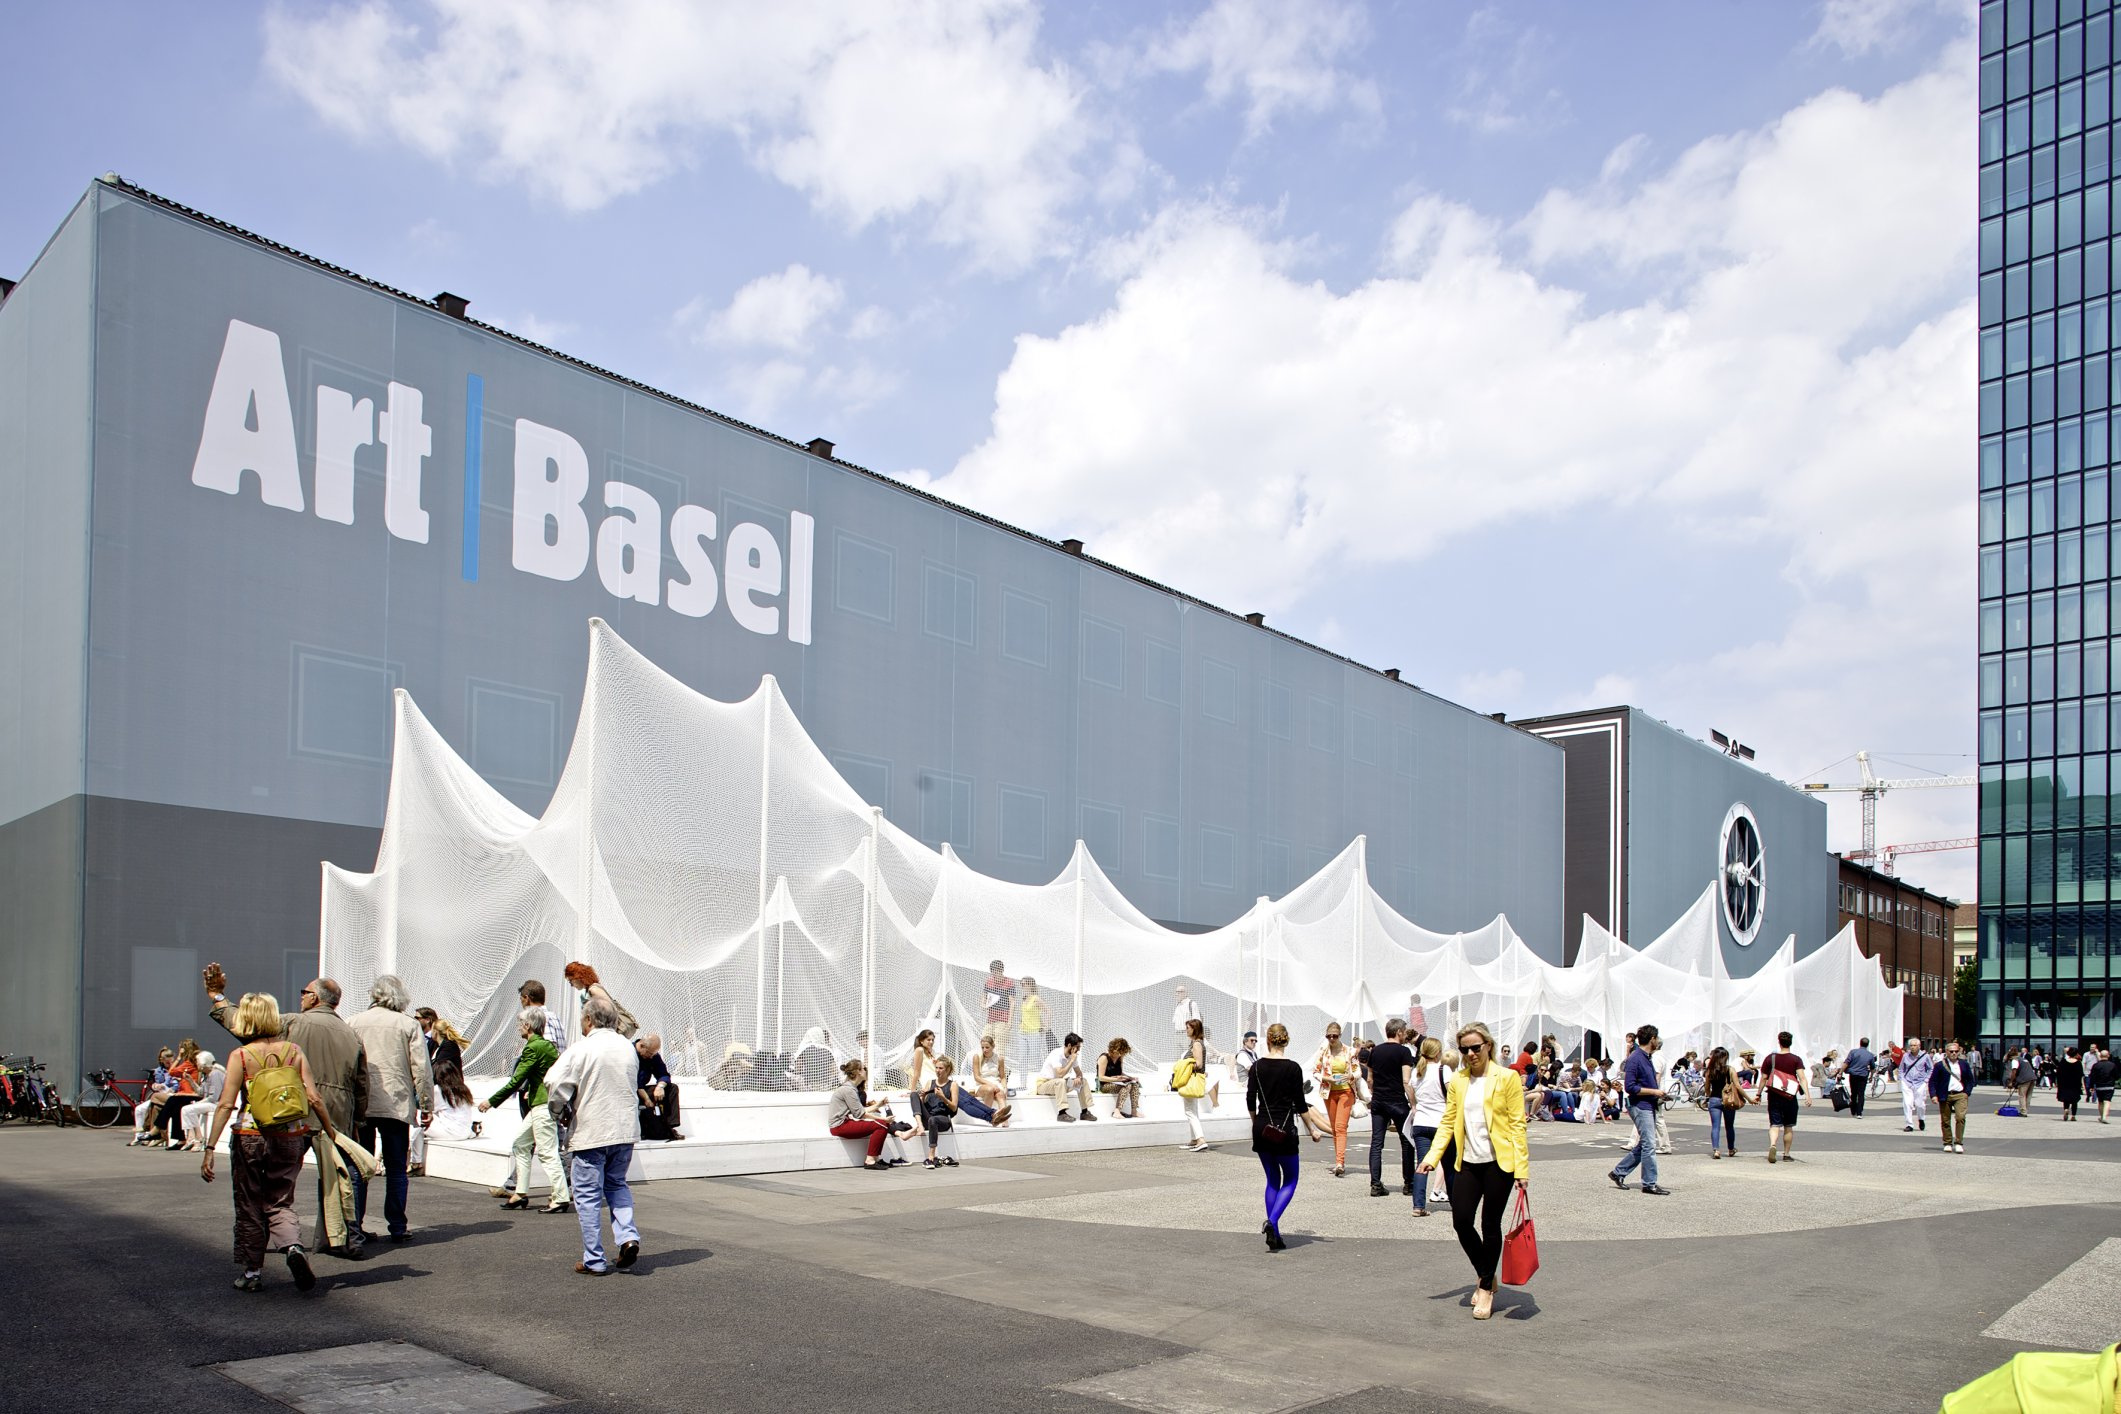 13 Art Basel Miami Beach 2015 Parties and Events to Check Out